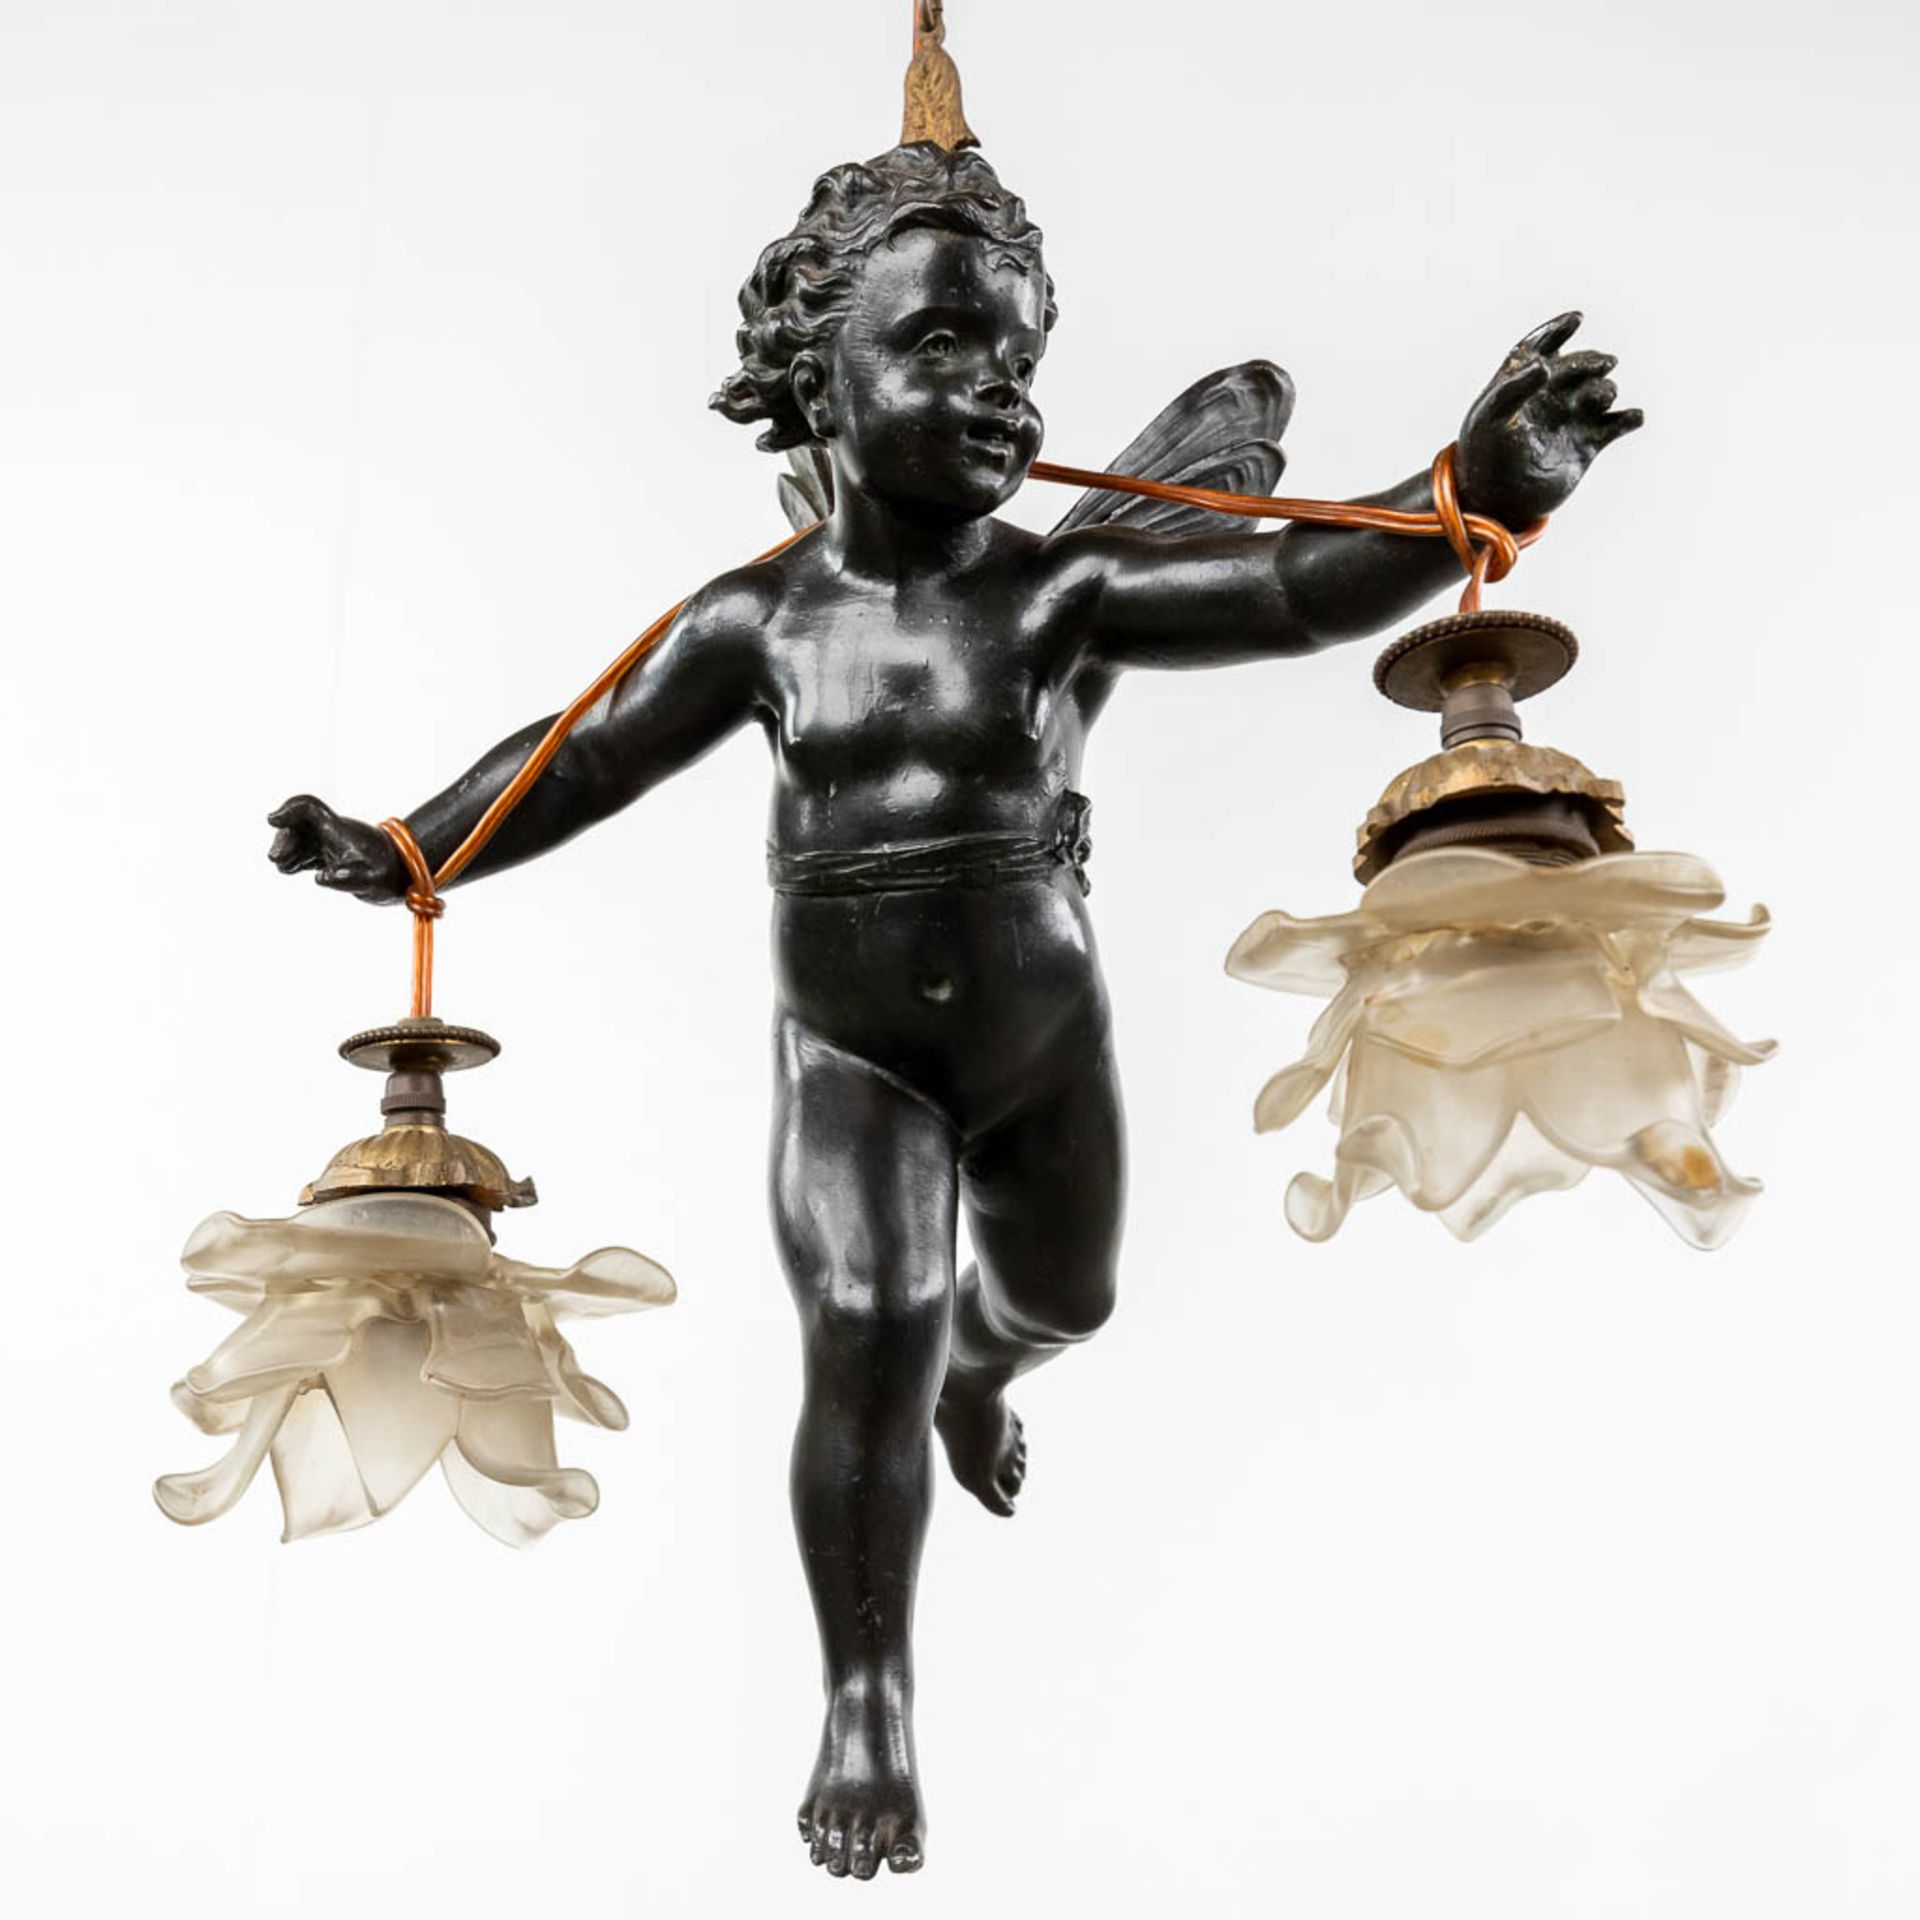 A hall lamp with a putto figurine, patinated bronze. Circa 1900. (W: 34 x H: 105 cm)